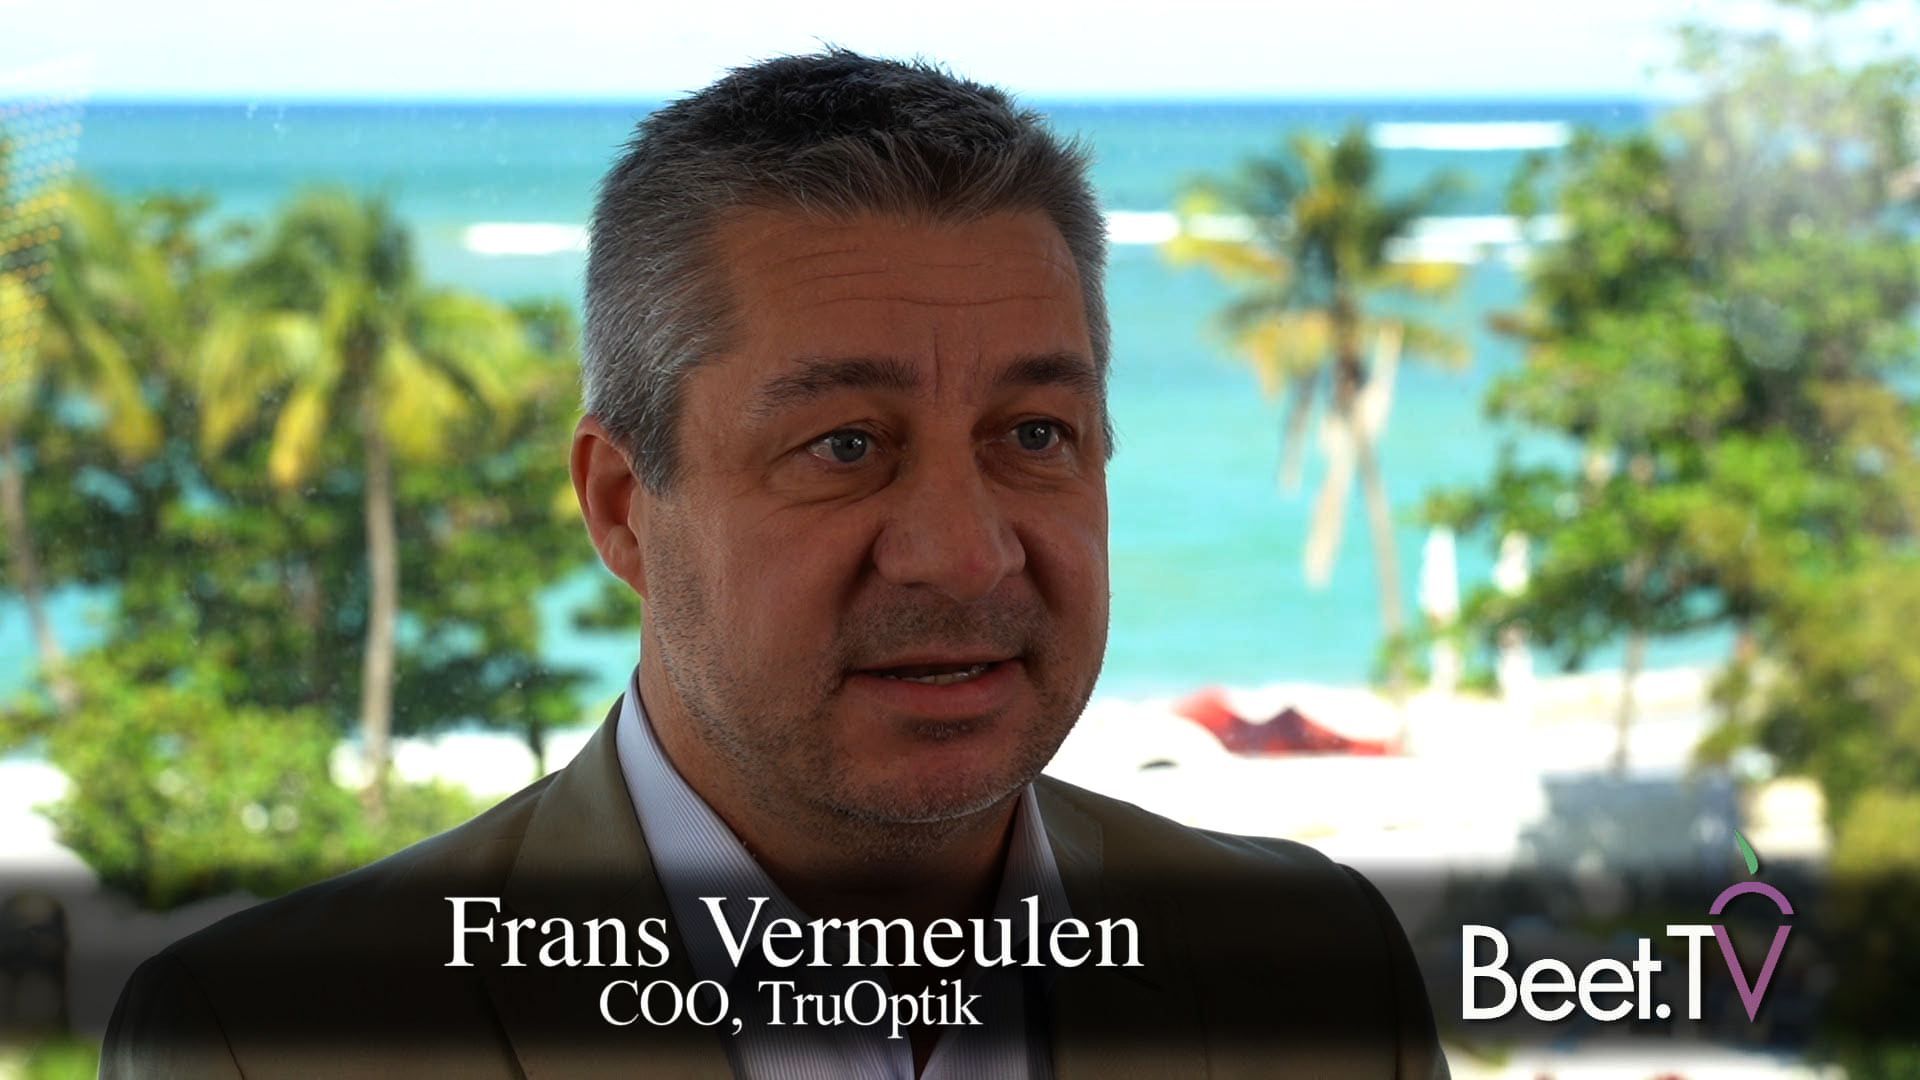 Getting Precise At The Household Level: Tru Optik’s Vermeulen explains Integration with Amobee